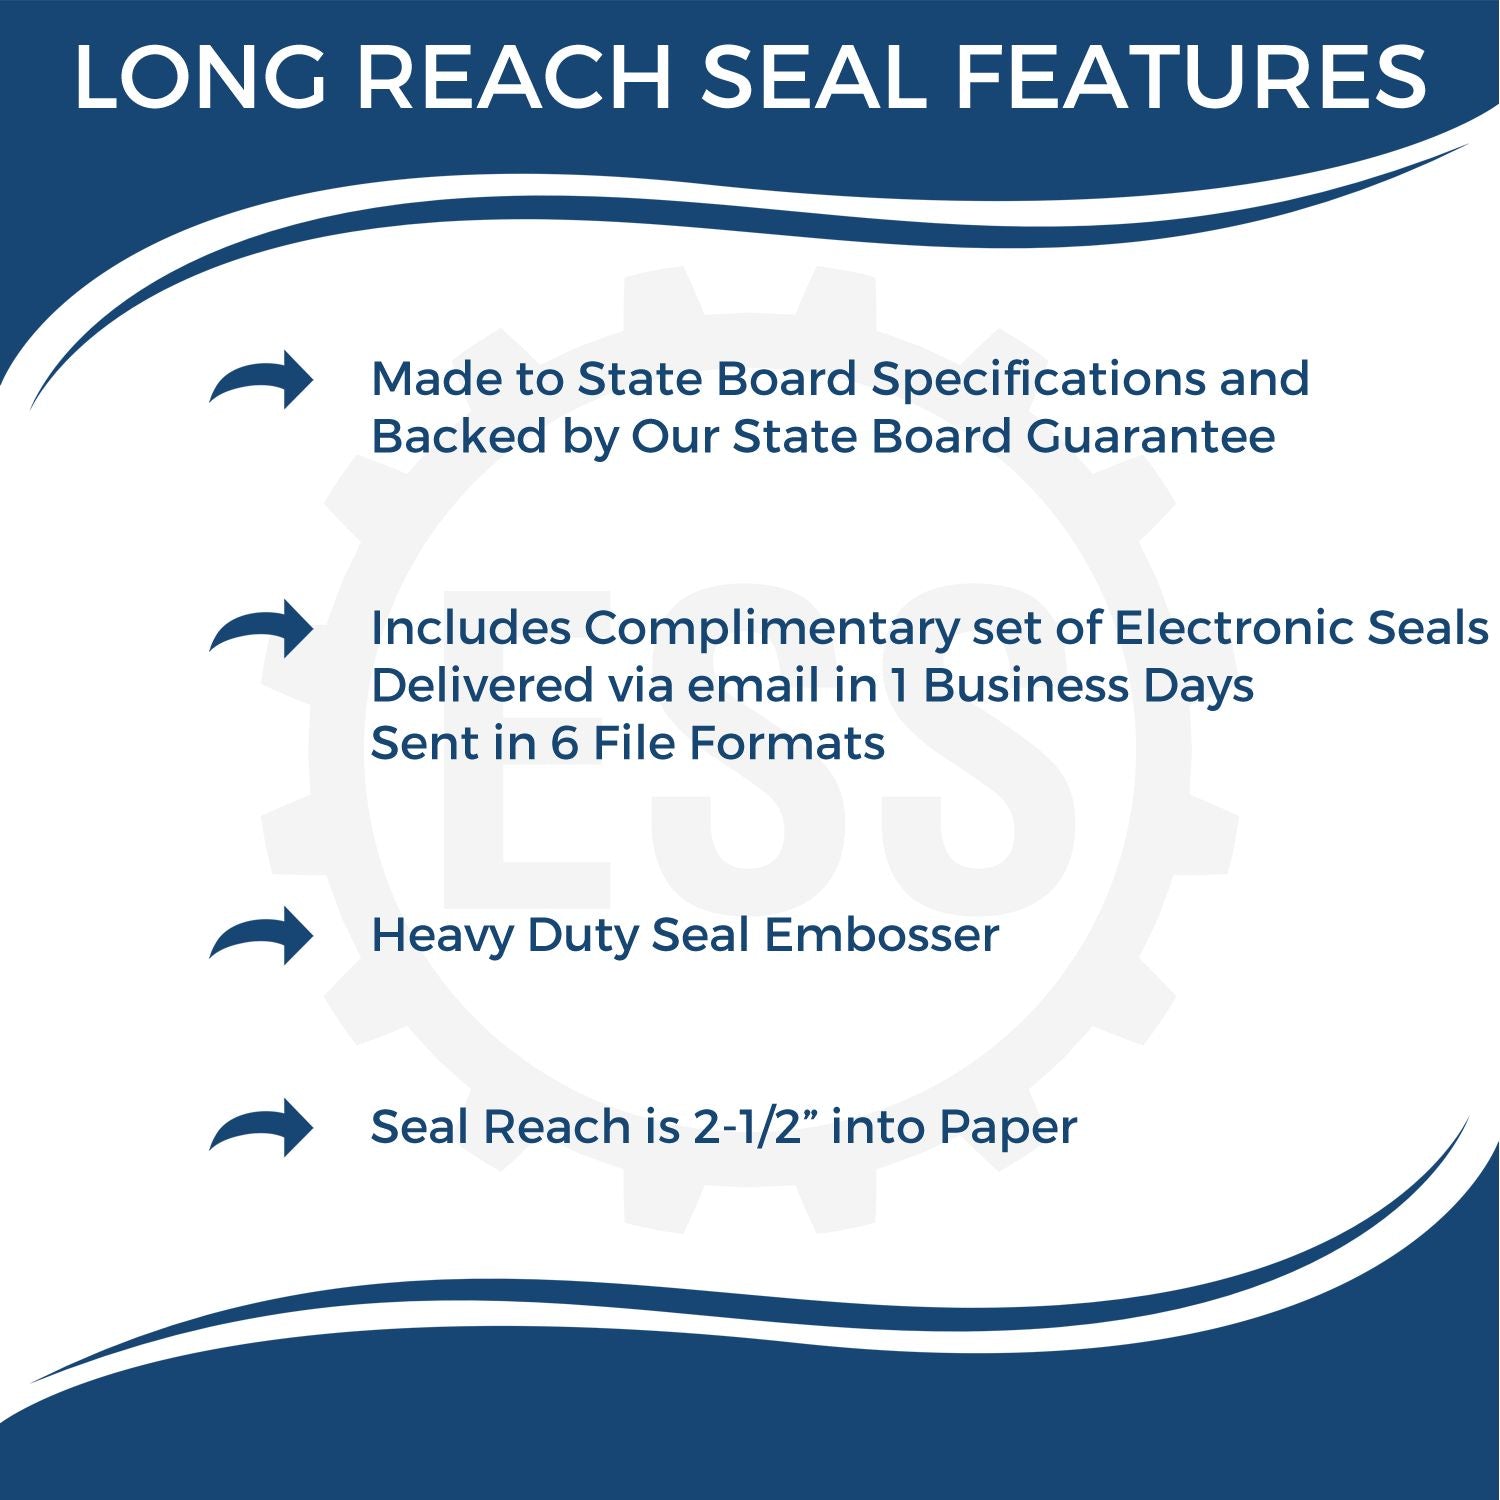 The main image for the Long Reach Idaho PE Seal depicting a sample of the imprint and electronic files